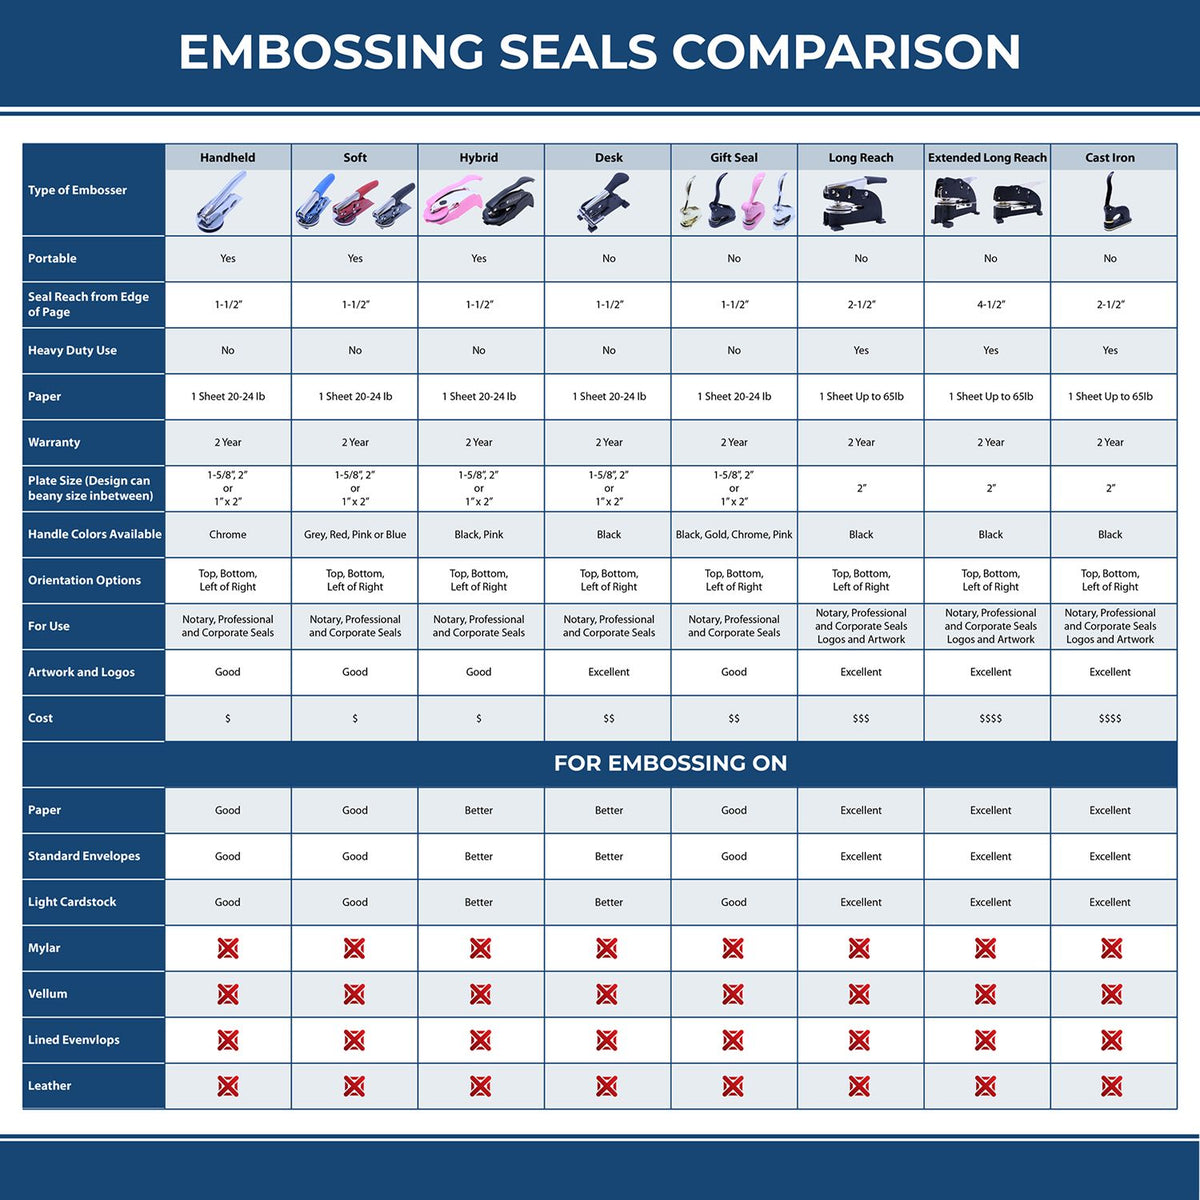 A comparison chart for the different types of mount models available for the Handheld Maine Professional Engineer Embosser.